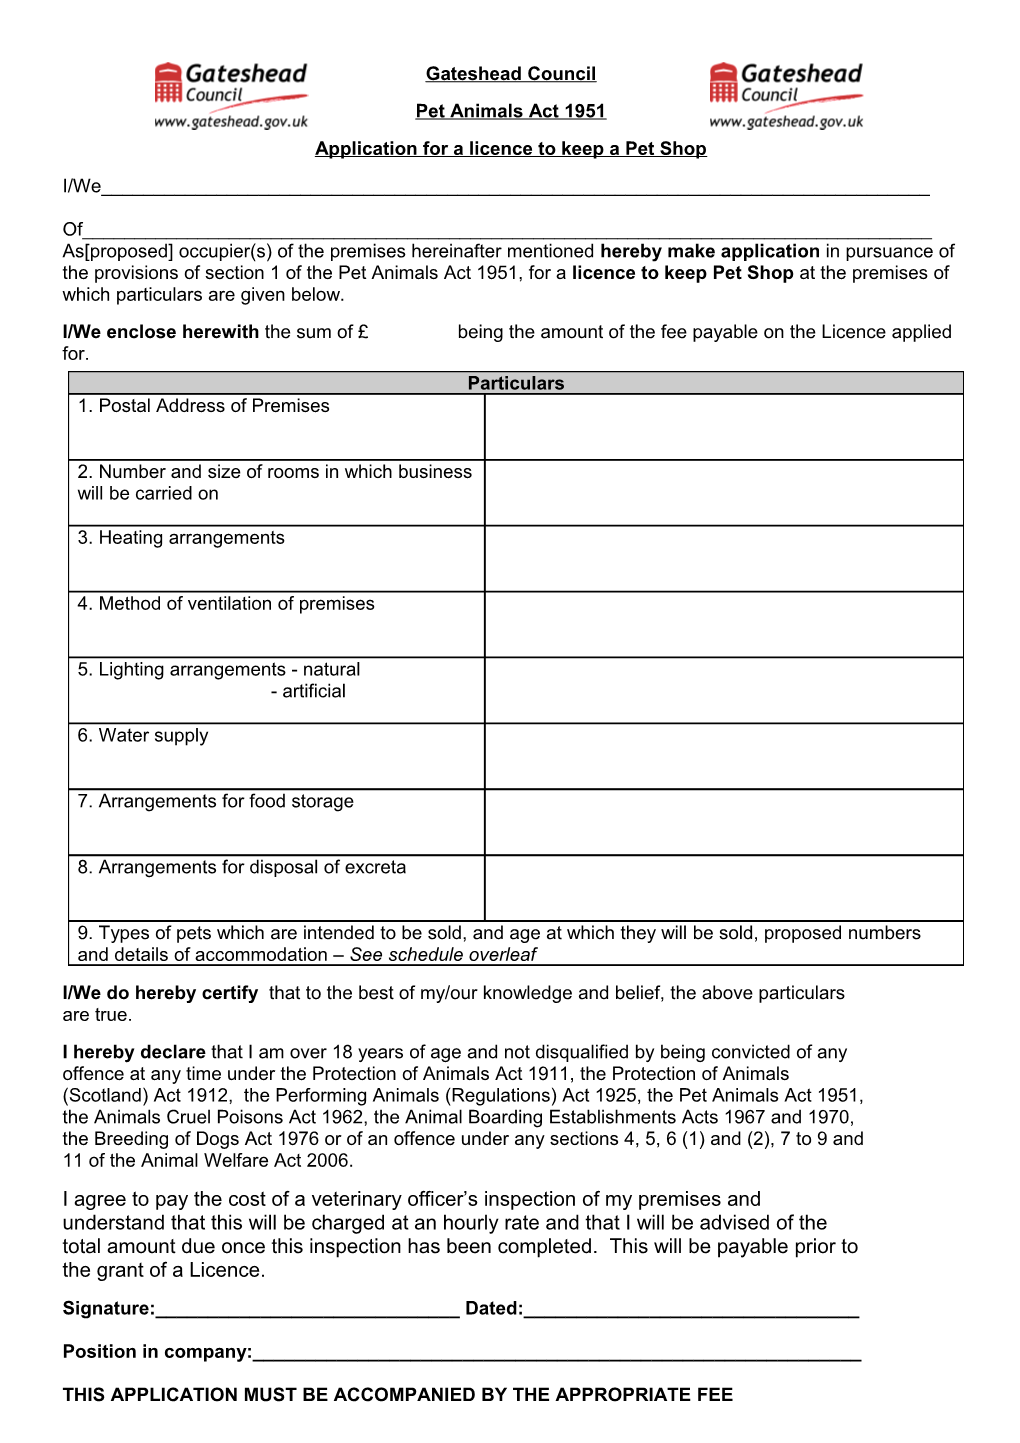 Application for a Licence to Keep a Pet Shop